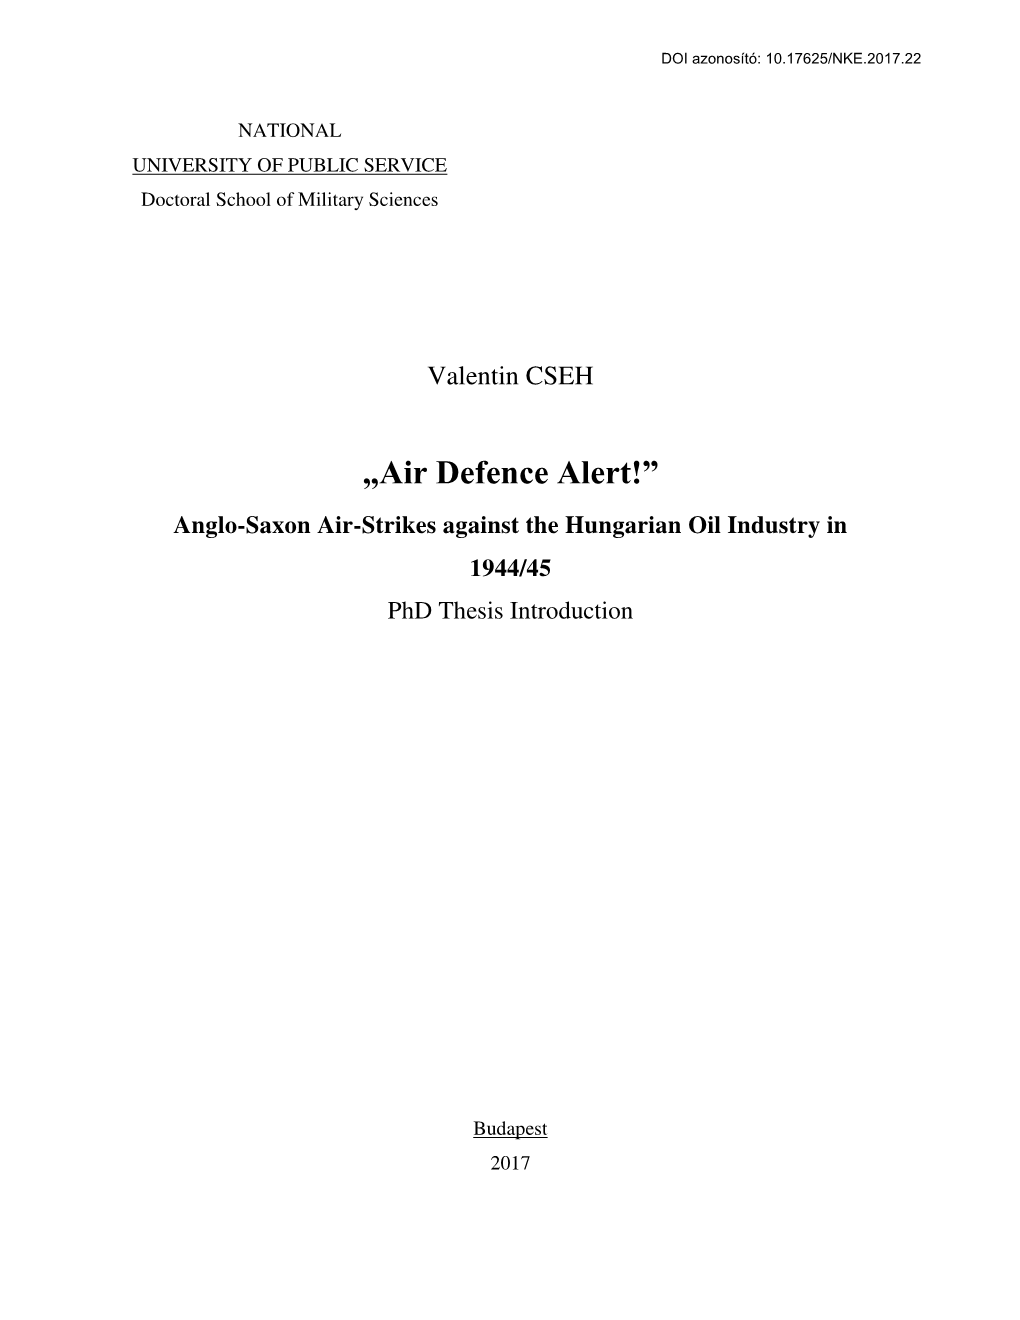 „Air Defence Alert!” Anglo-Saxon Air-Strikes Against the Hungarian Oil Industry in 1944/45 Phd Thesis Introduction